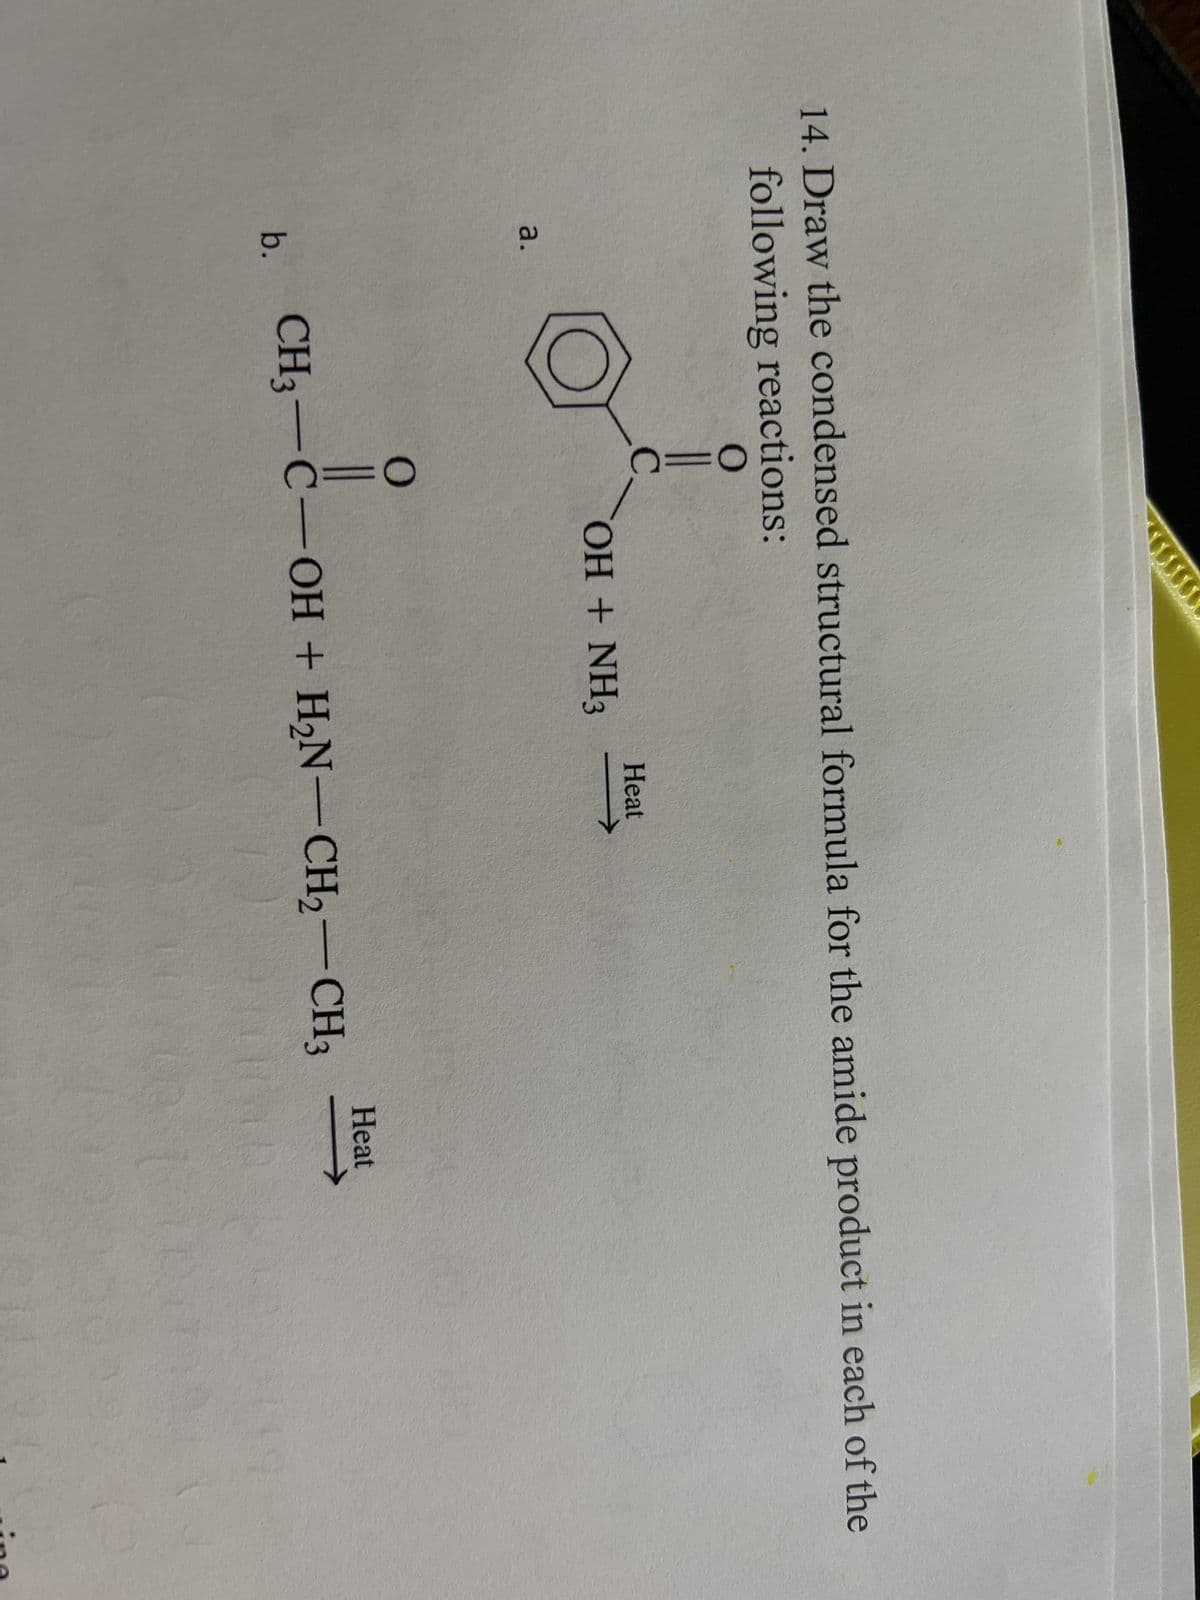 14. Draw the condensed structural formula for the amide product in each of the
following reactions:
O
a.
b.
C
OH + NH3
Heat
O
||
CH3-C-OH + H₂N-CH2-CH3
Heat
ine